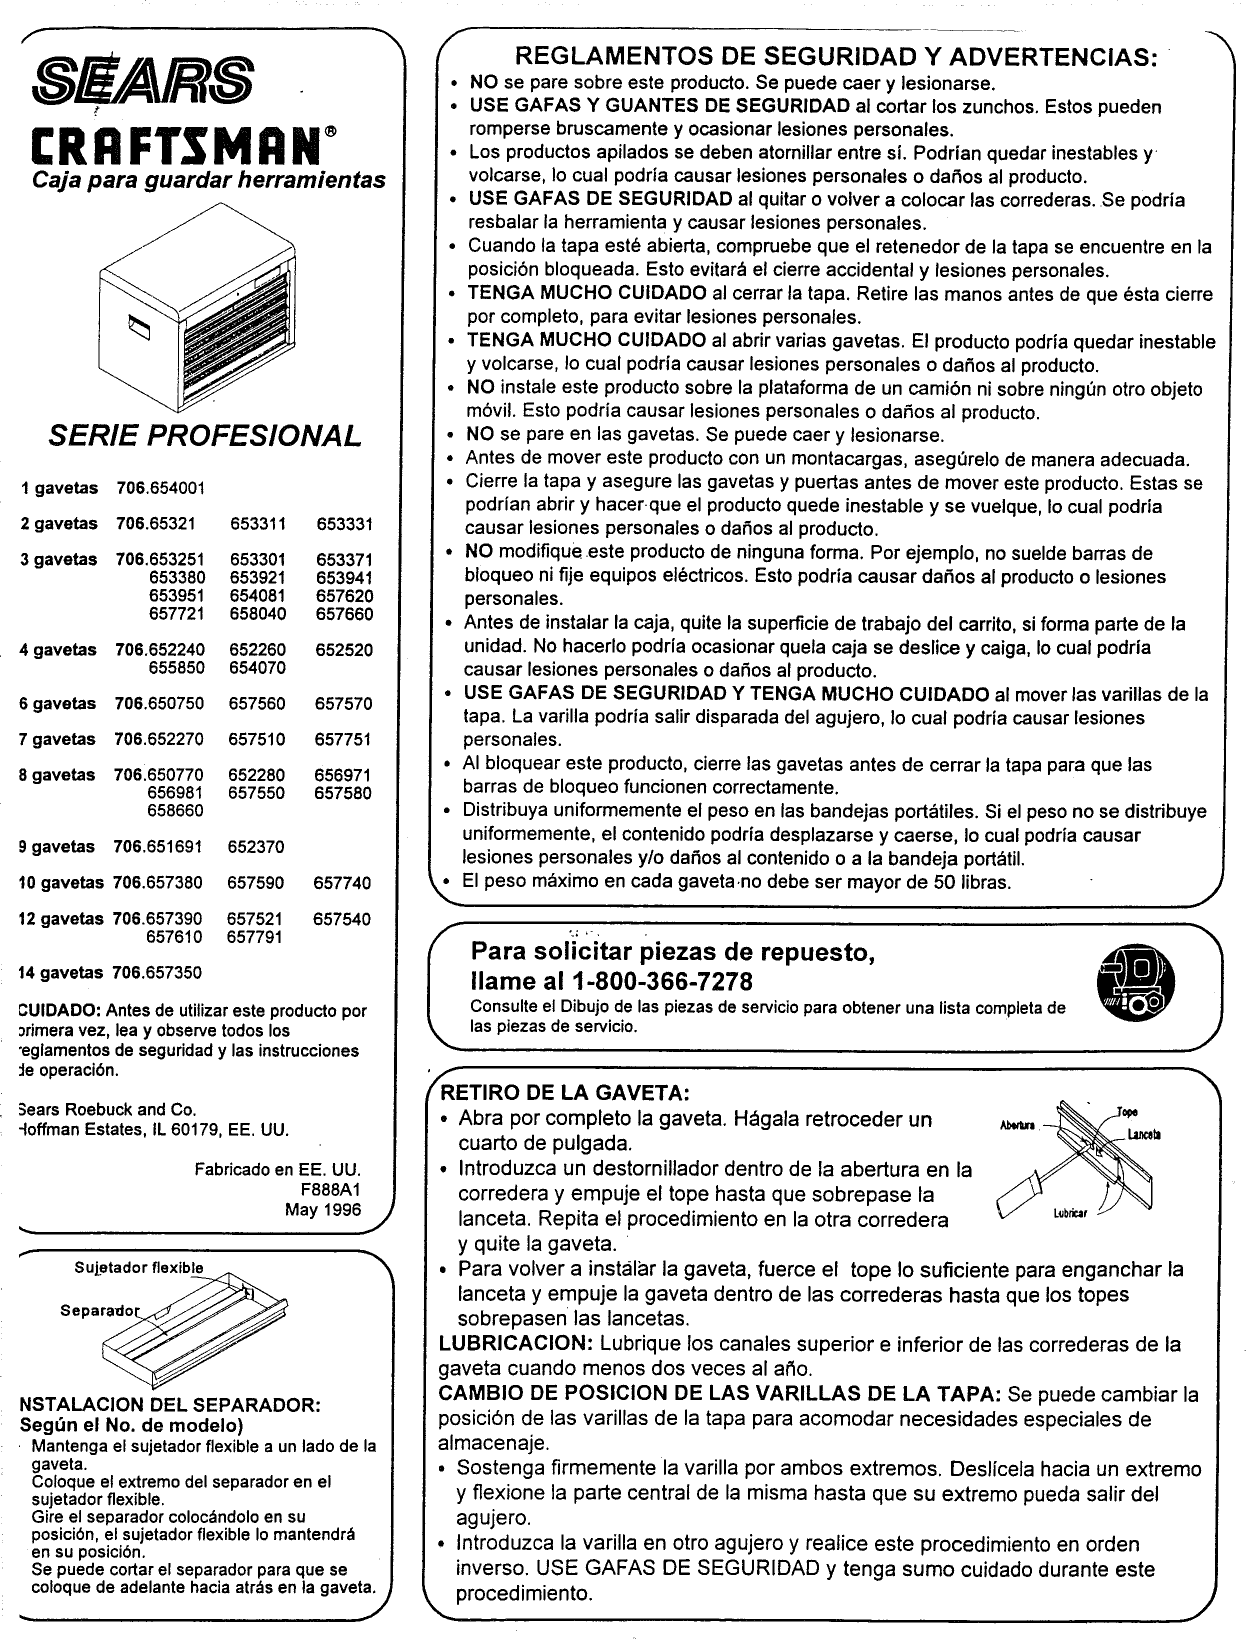 Page 2 of 2 - Craftsman 706650750 User Manual  6 DRAWER PROFESSIONAL CHEST - Manuals And Guides L0809034